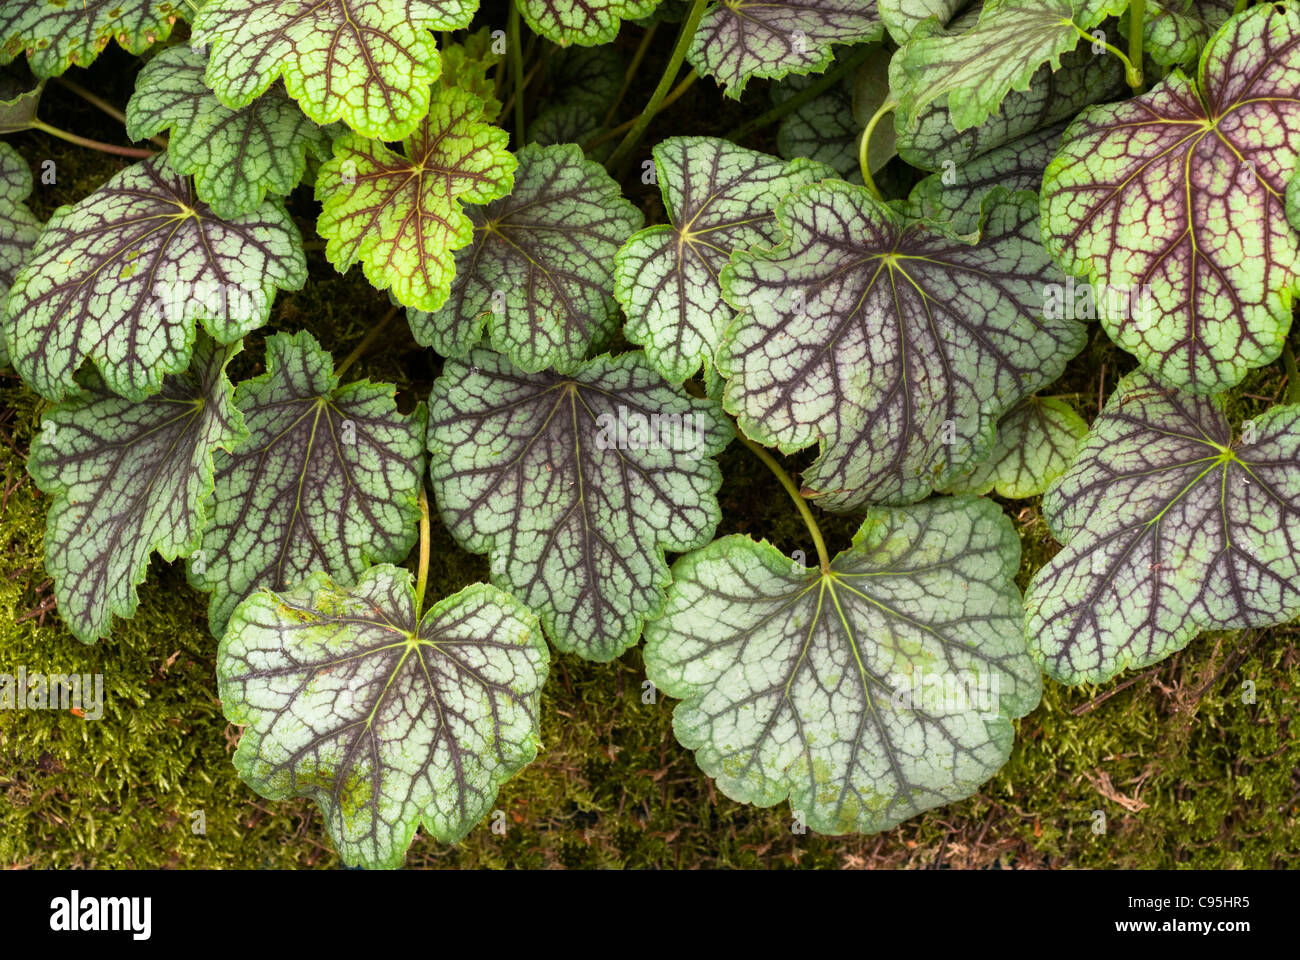 Heuchera ‘Green Spice’ perennial foliage plant with red striped veined leaves for shade garden Stock Photo